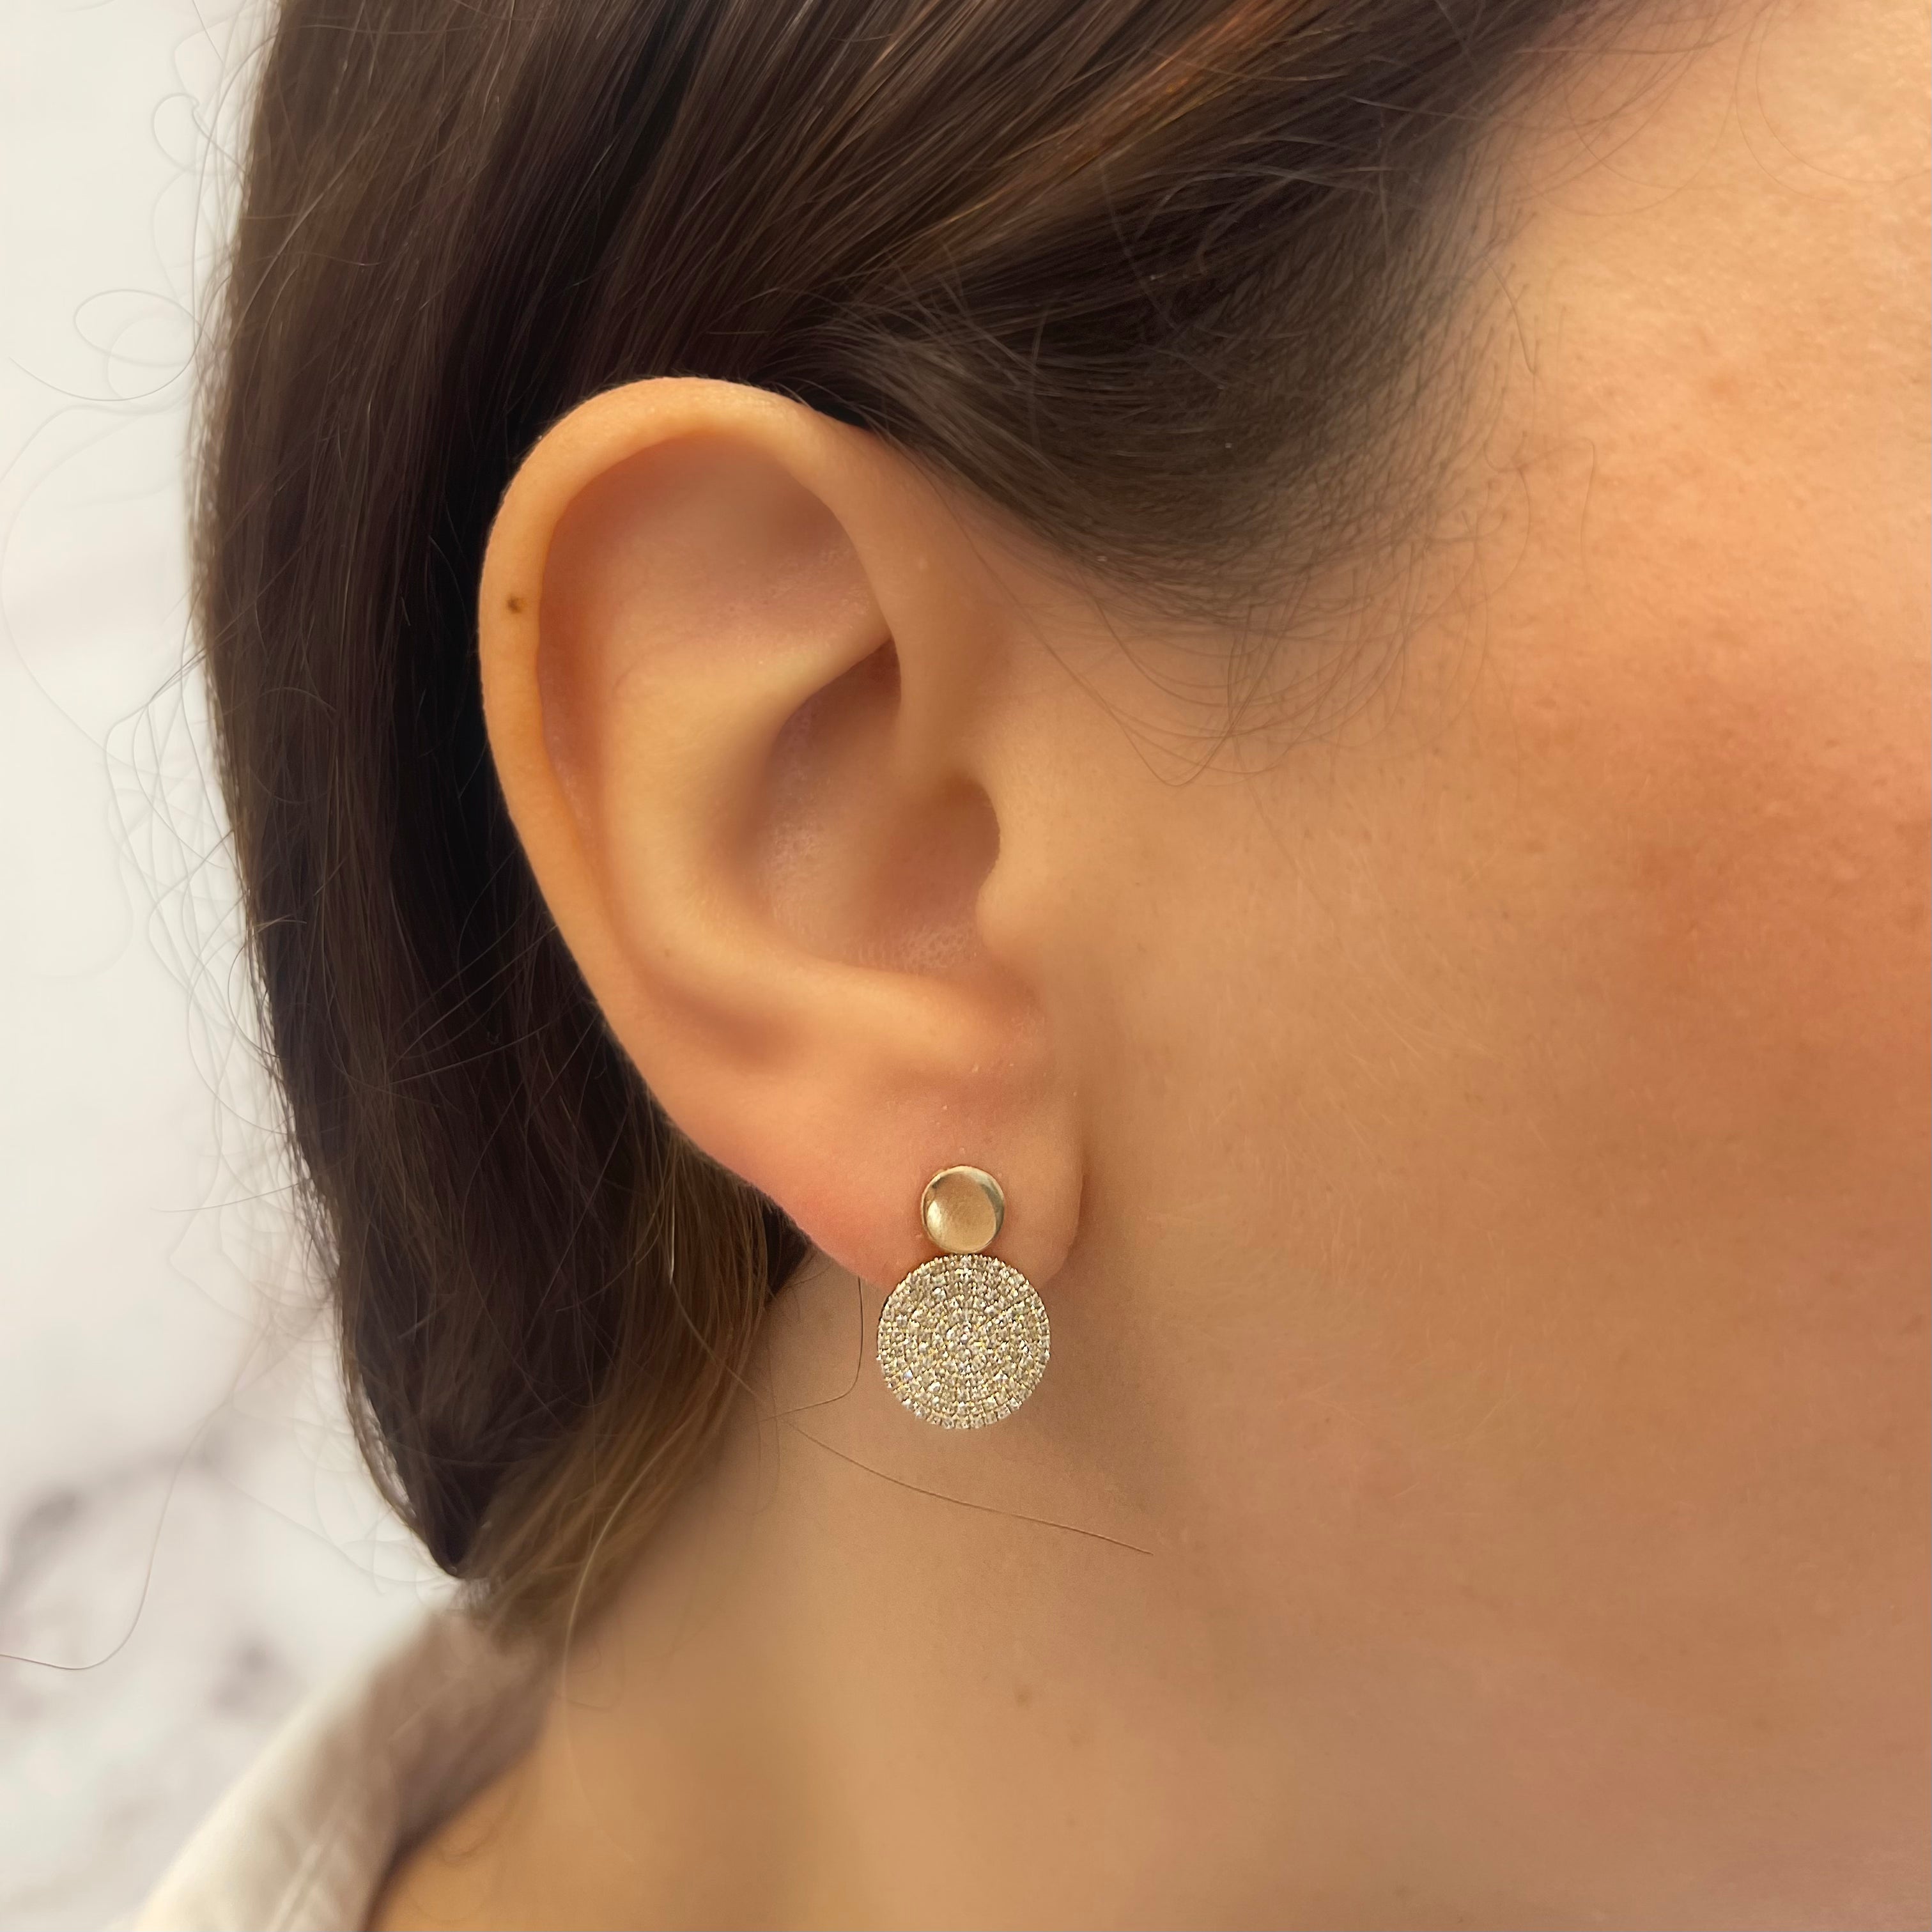 Solid Pave Disc Earrings